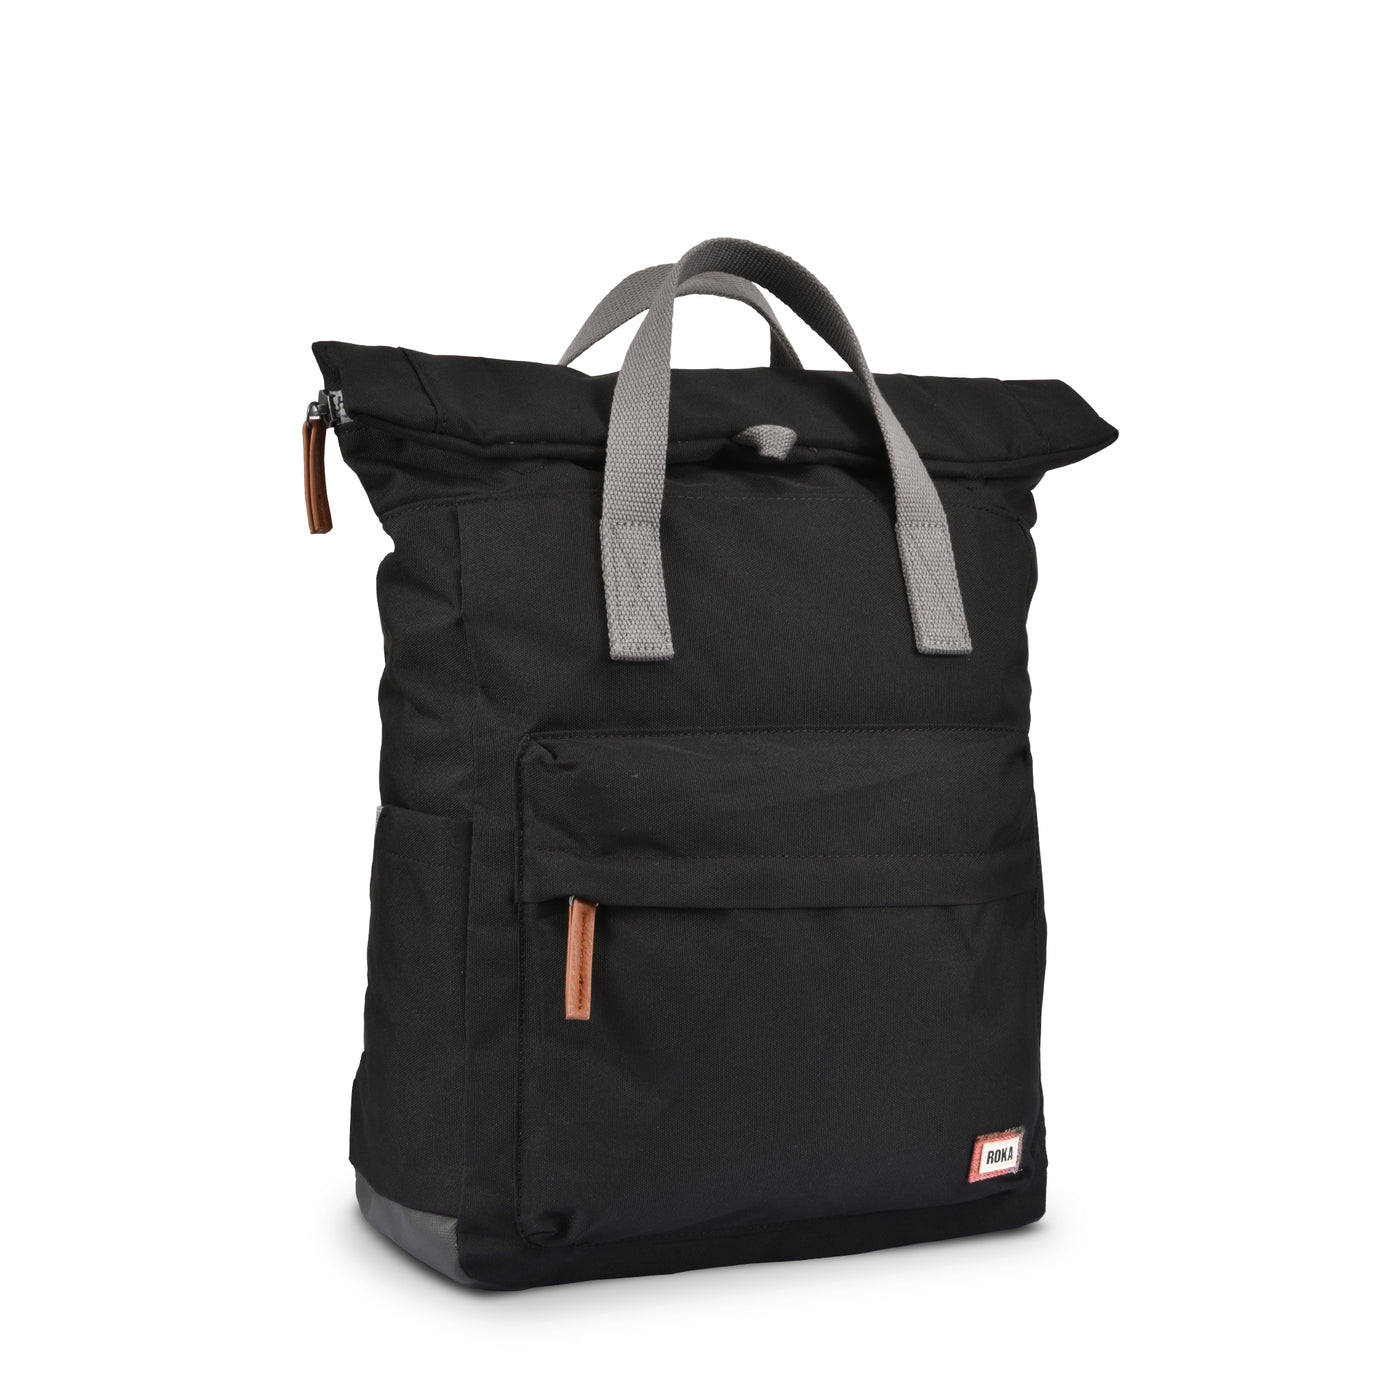 Flannel Canfield B Black Recycled Canvas